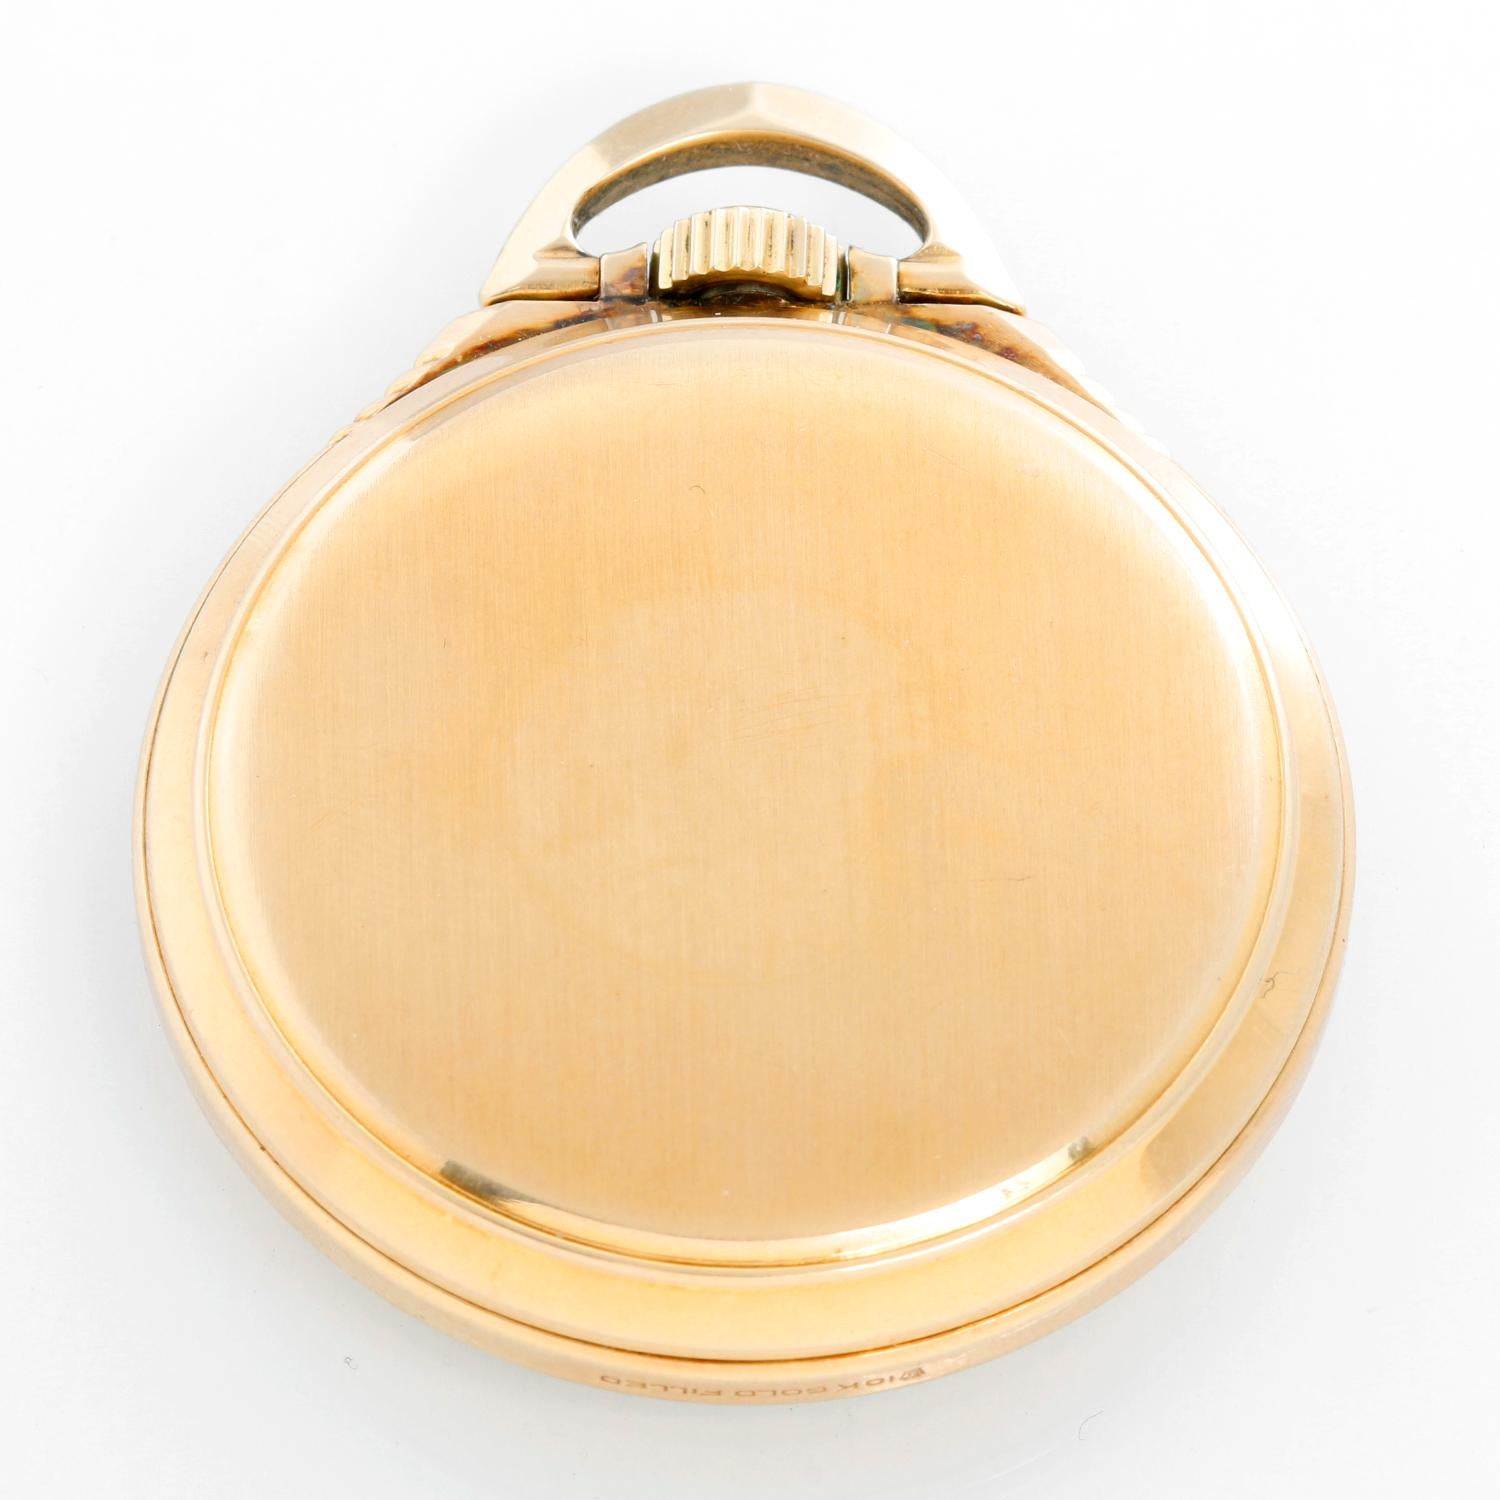 Elgin 23J BW Raymond Pocket Watch - Manual winding; 23 Jewel. 10K Gold filled ( 50 mm). Up and down indicator with 24 hour dial; White with Arabic numerals and sunken subdials . Very hard to find in this condition. Circa 1934. Pre-owned with